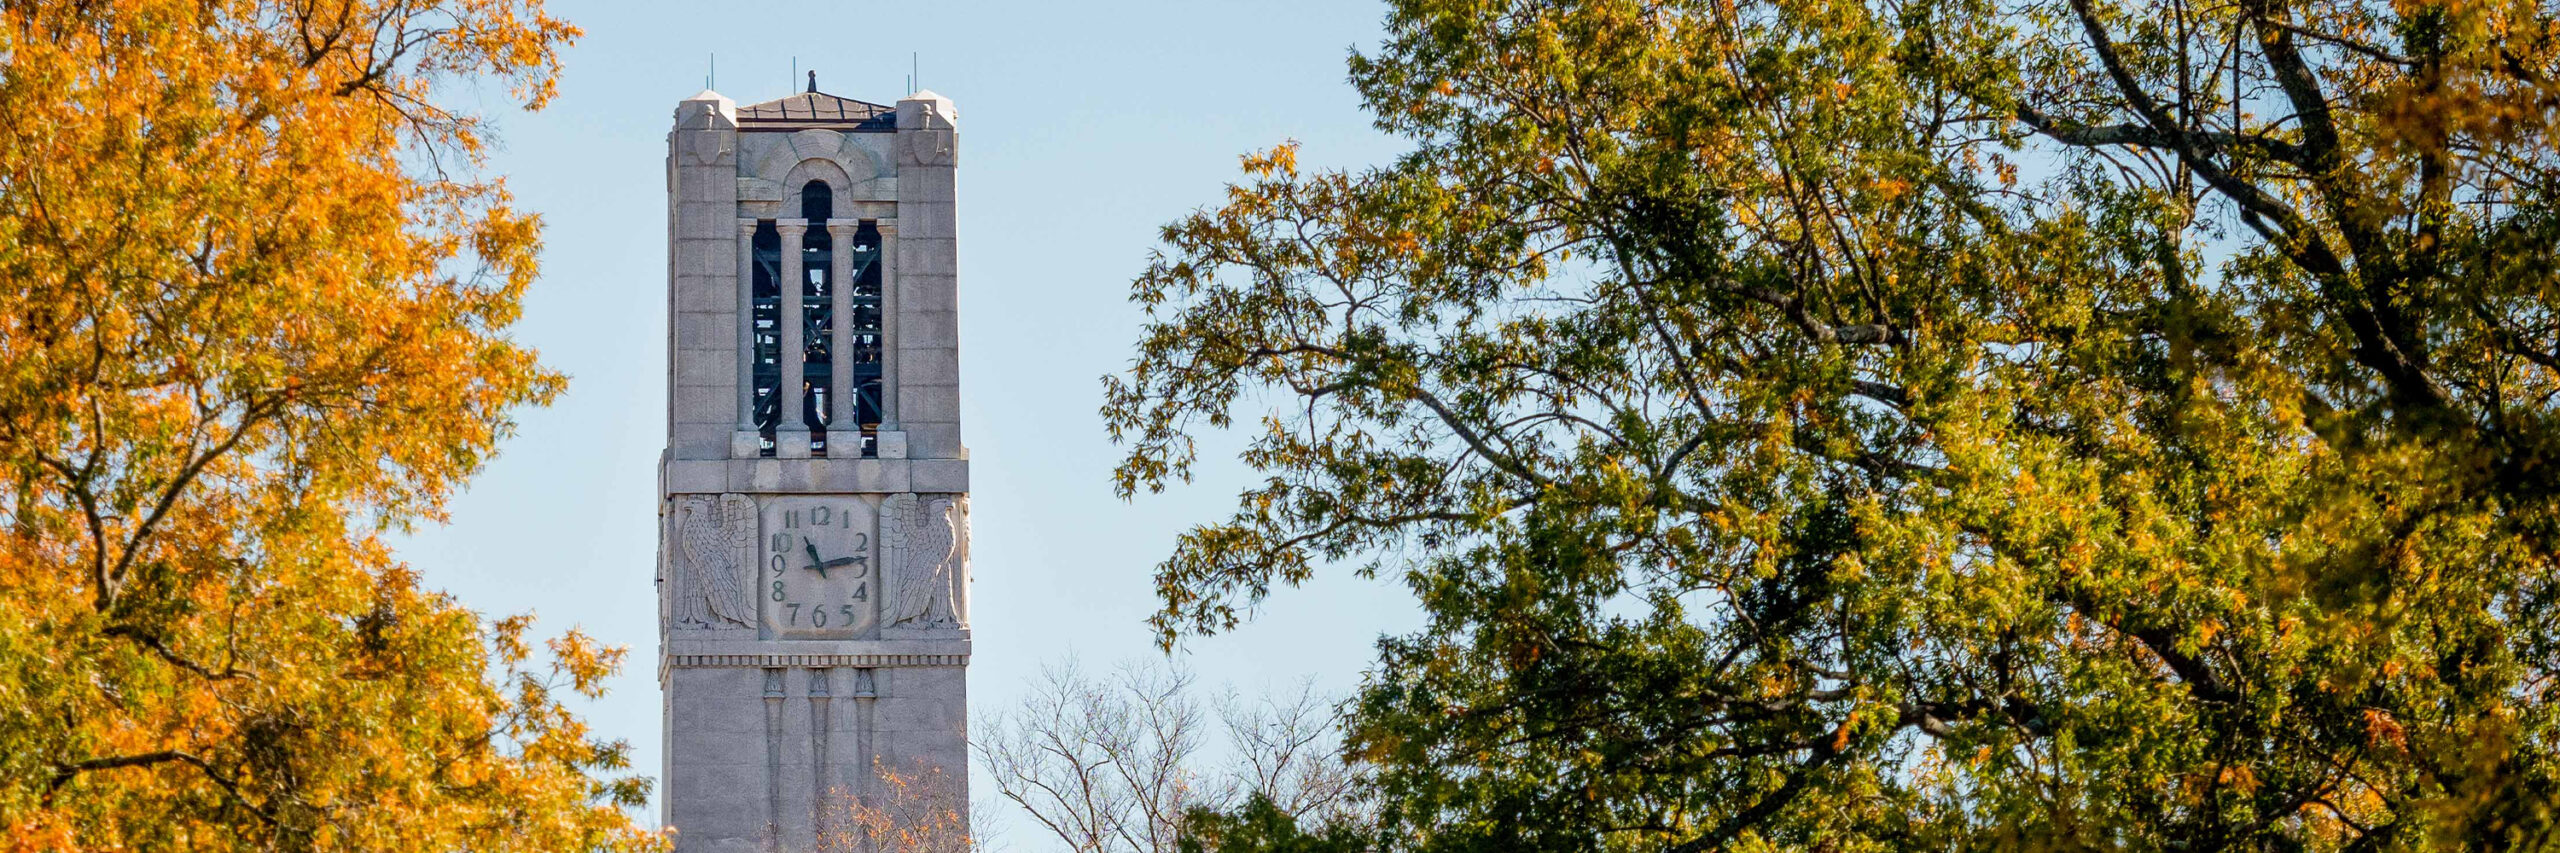 The Memorial Belltower surrounded by fall leaves.